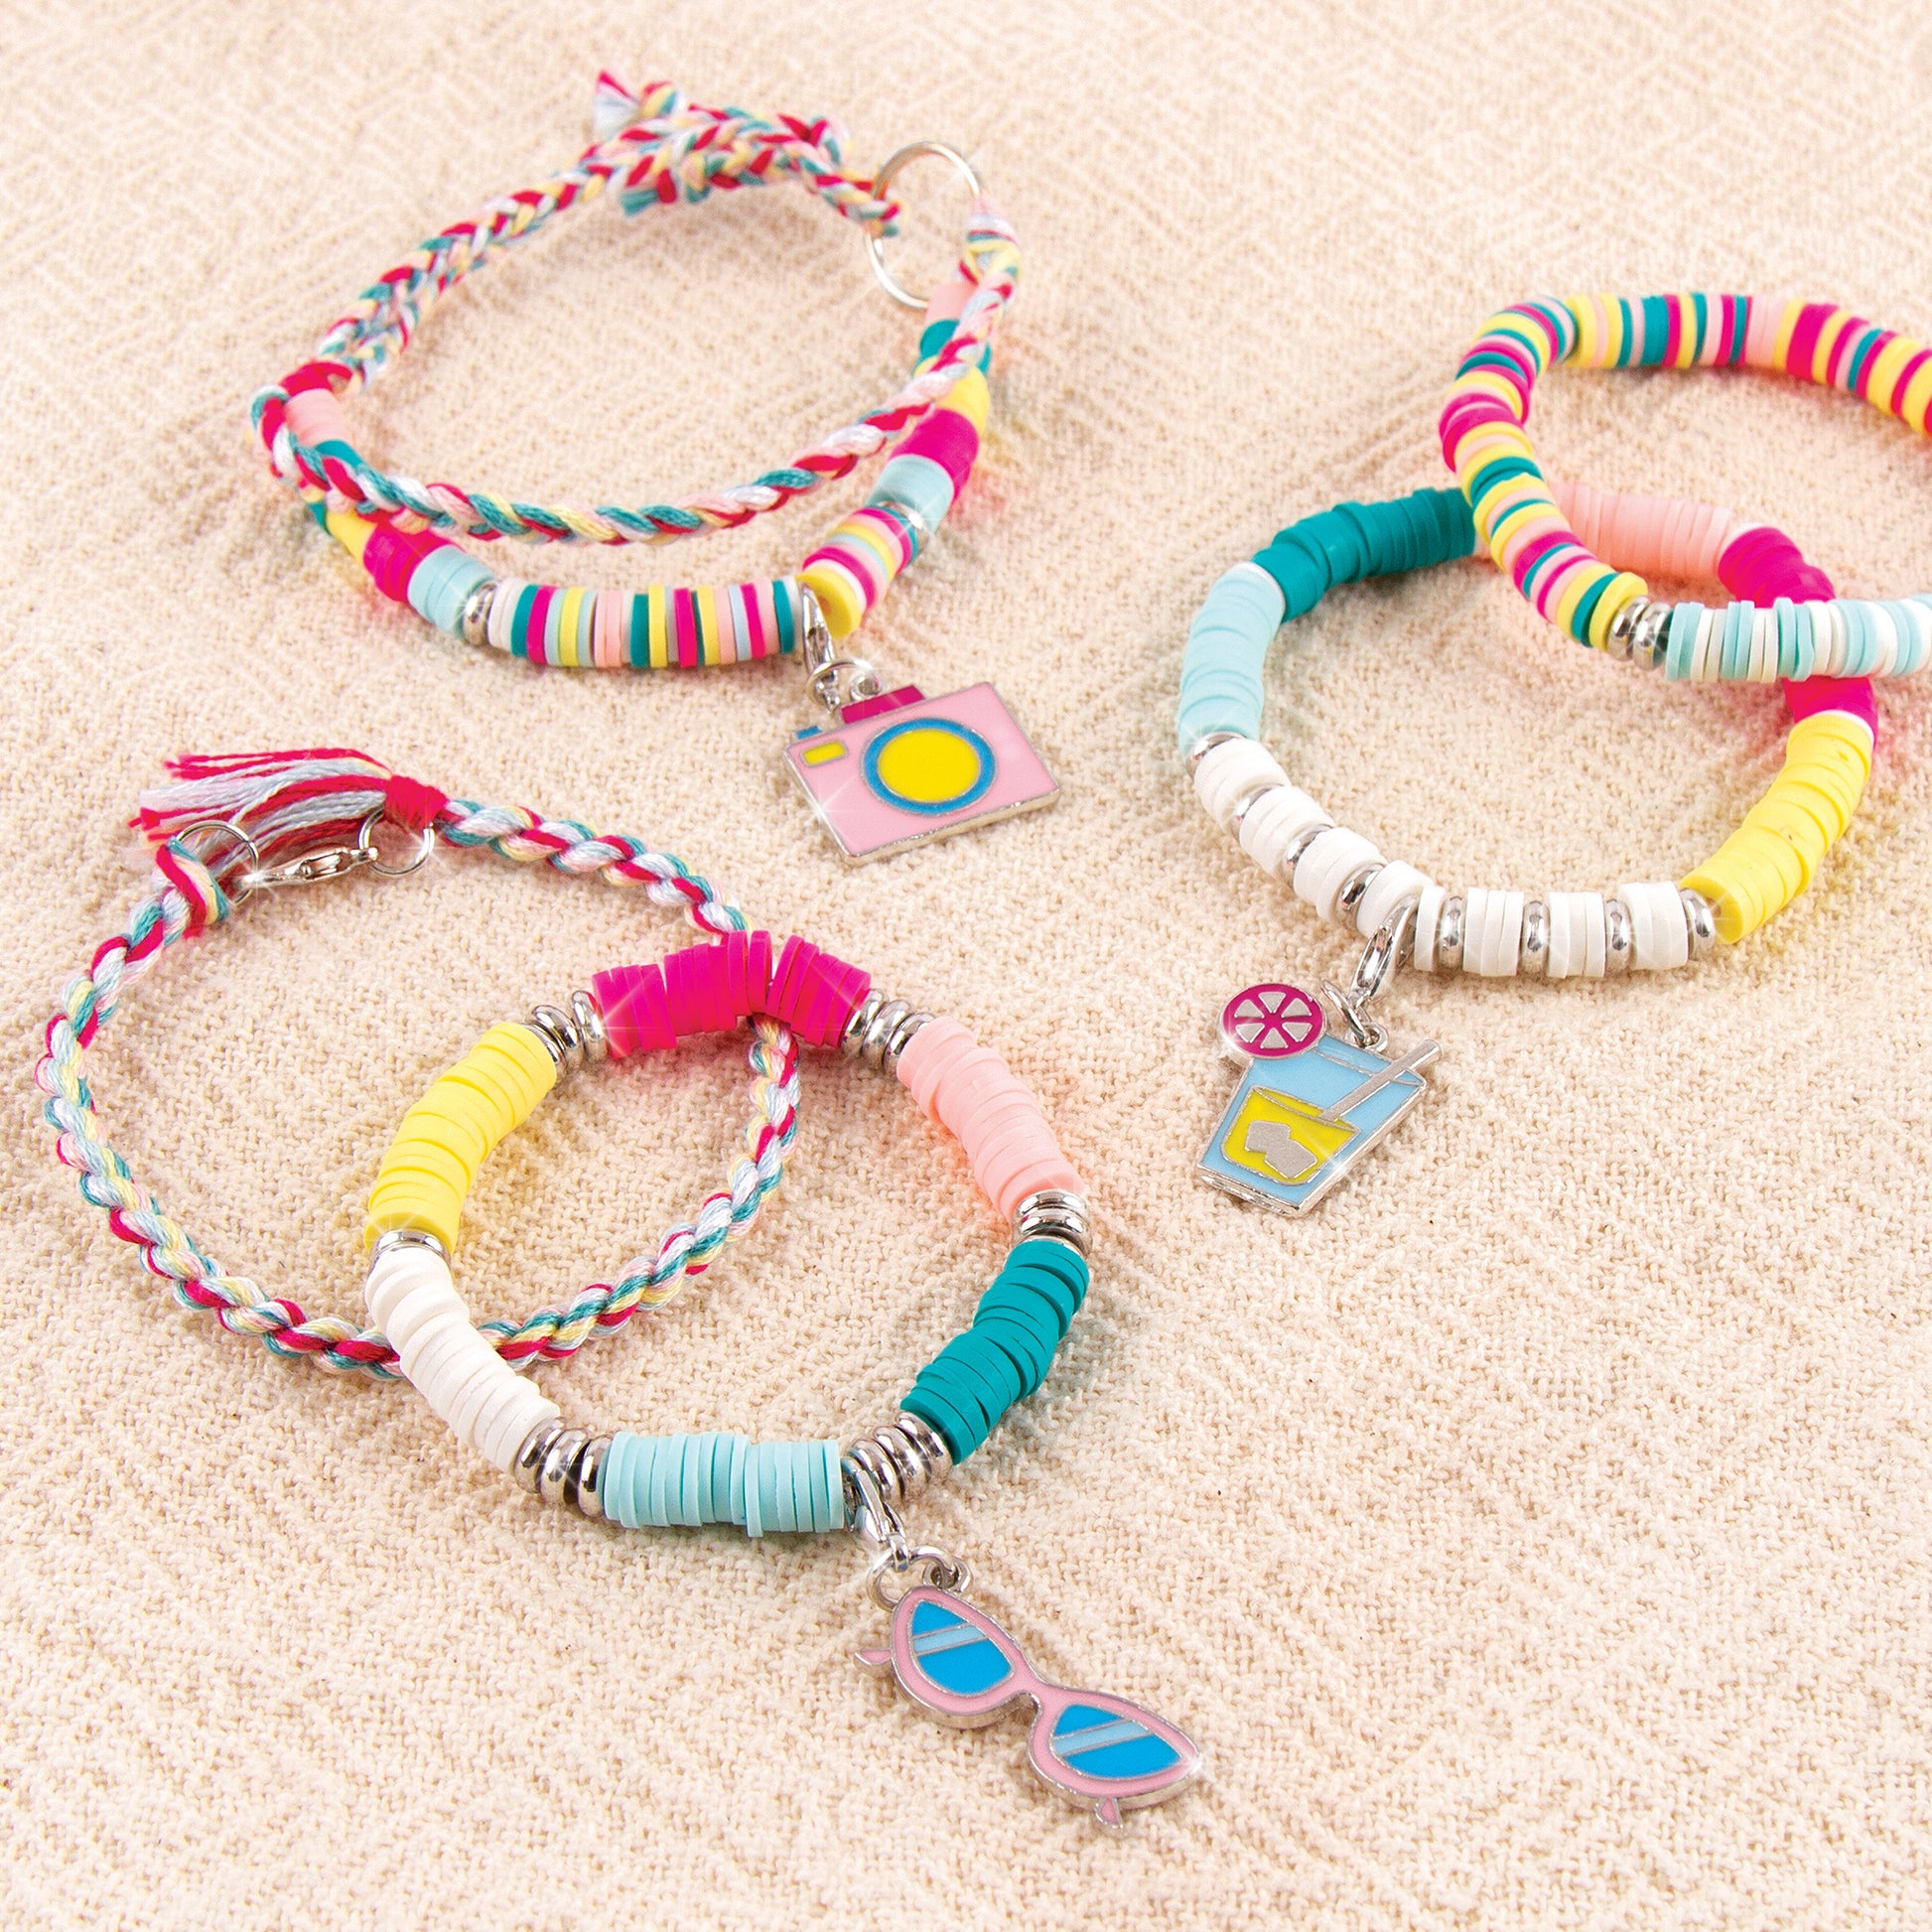 Juicy Couture: Love Letters All-In-One DIY Bracelets Kit- Create 8